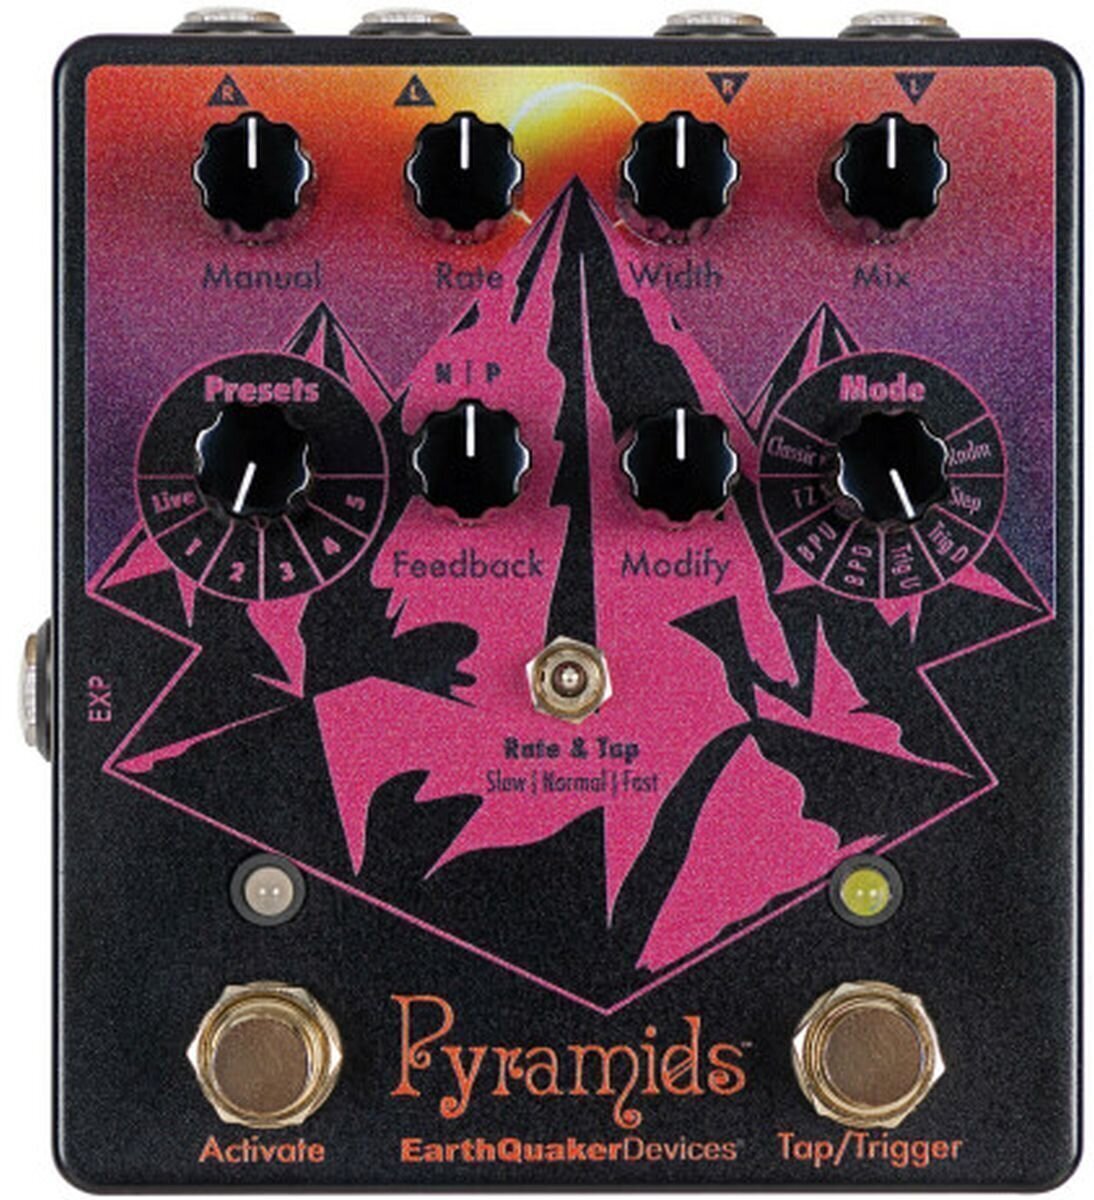 EarthQuaker Devices PYRAMIDS SE EarthQuaker Devices